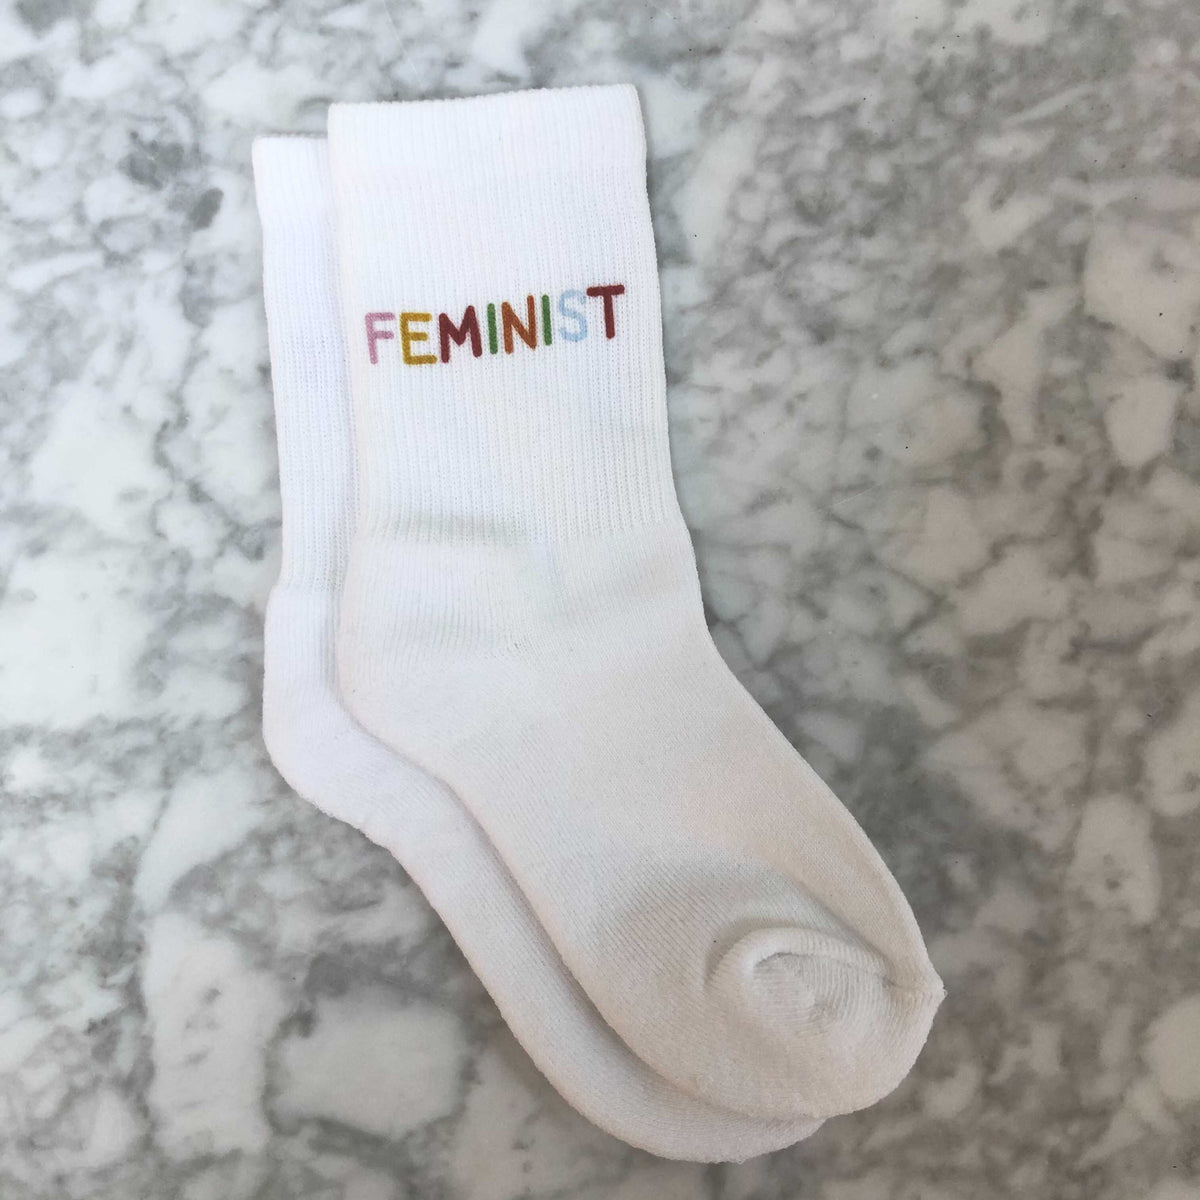 Feminist Youth Socks - The Outrage